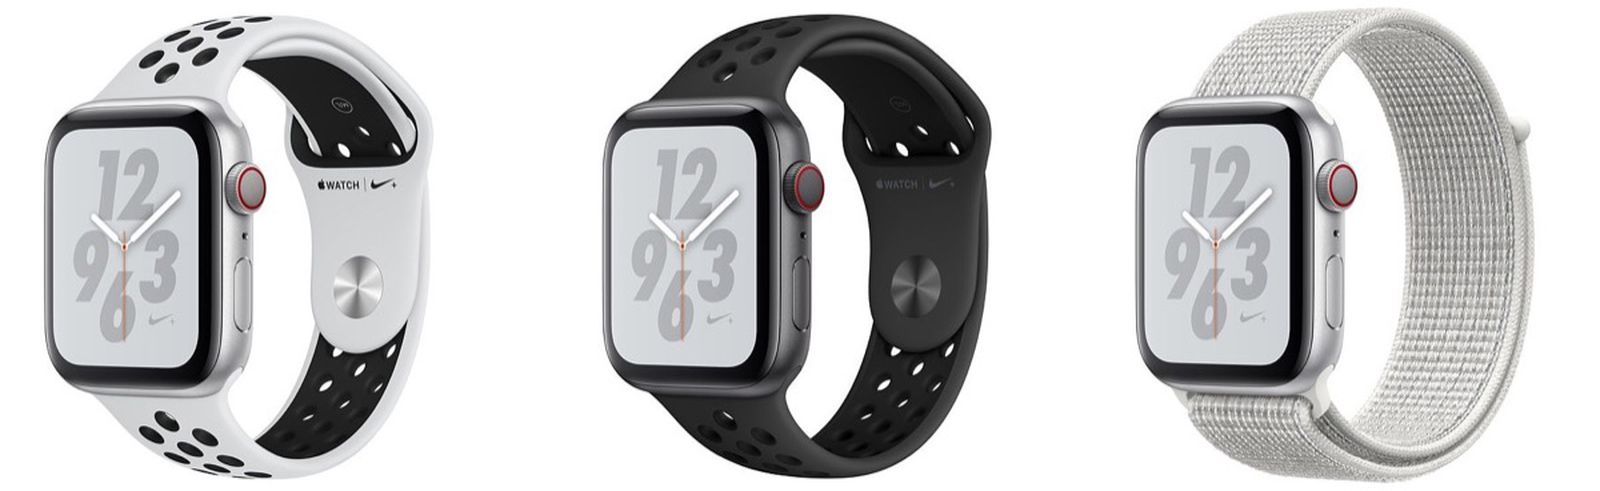 Apple Watch Nike+ Series 4 Launches With Limited Quantities